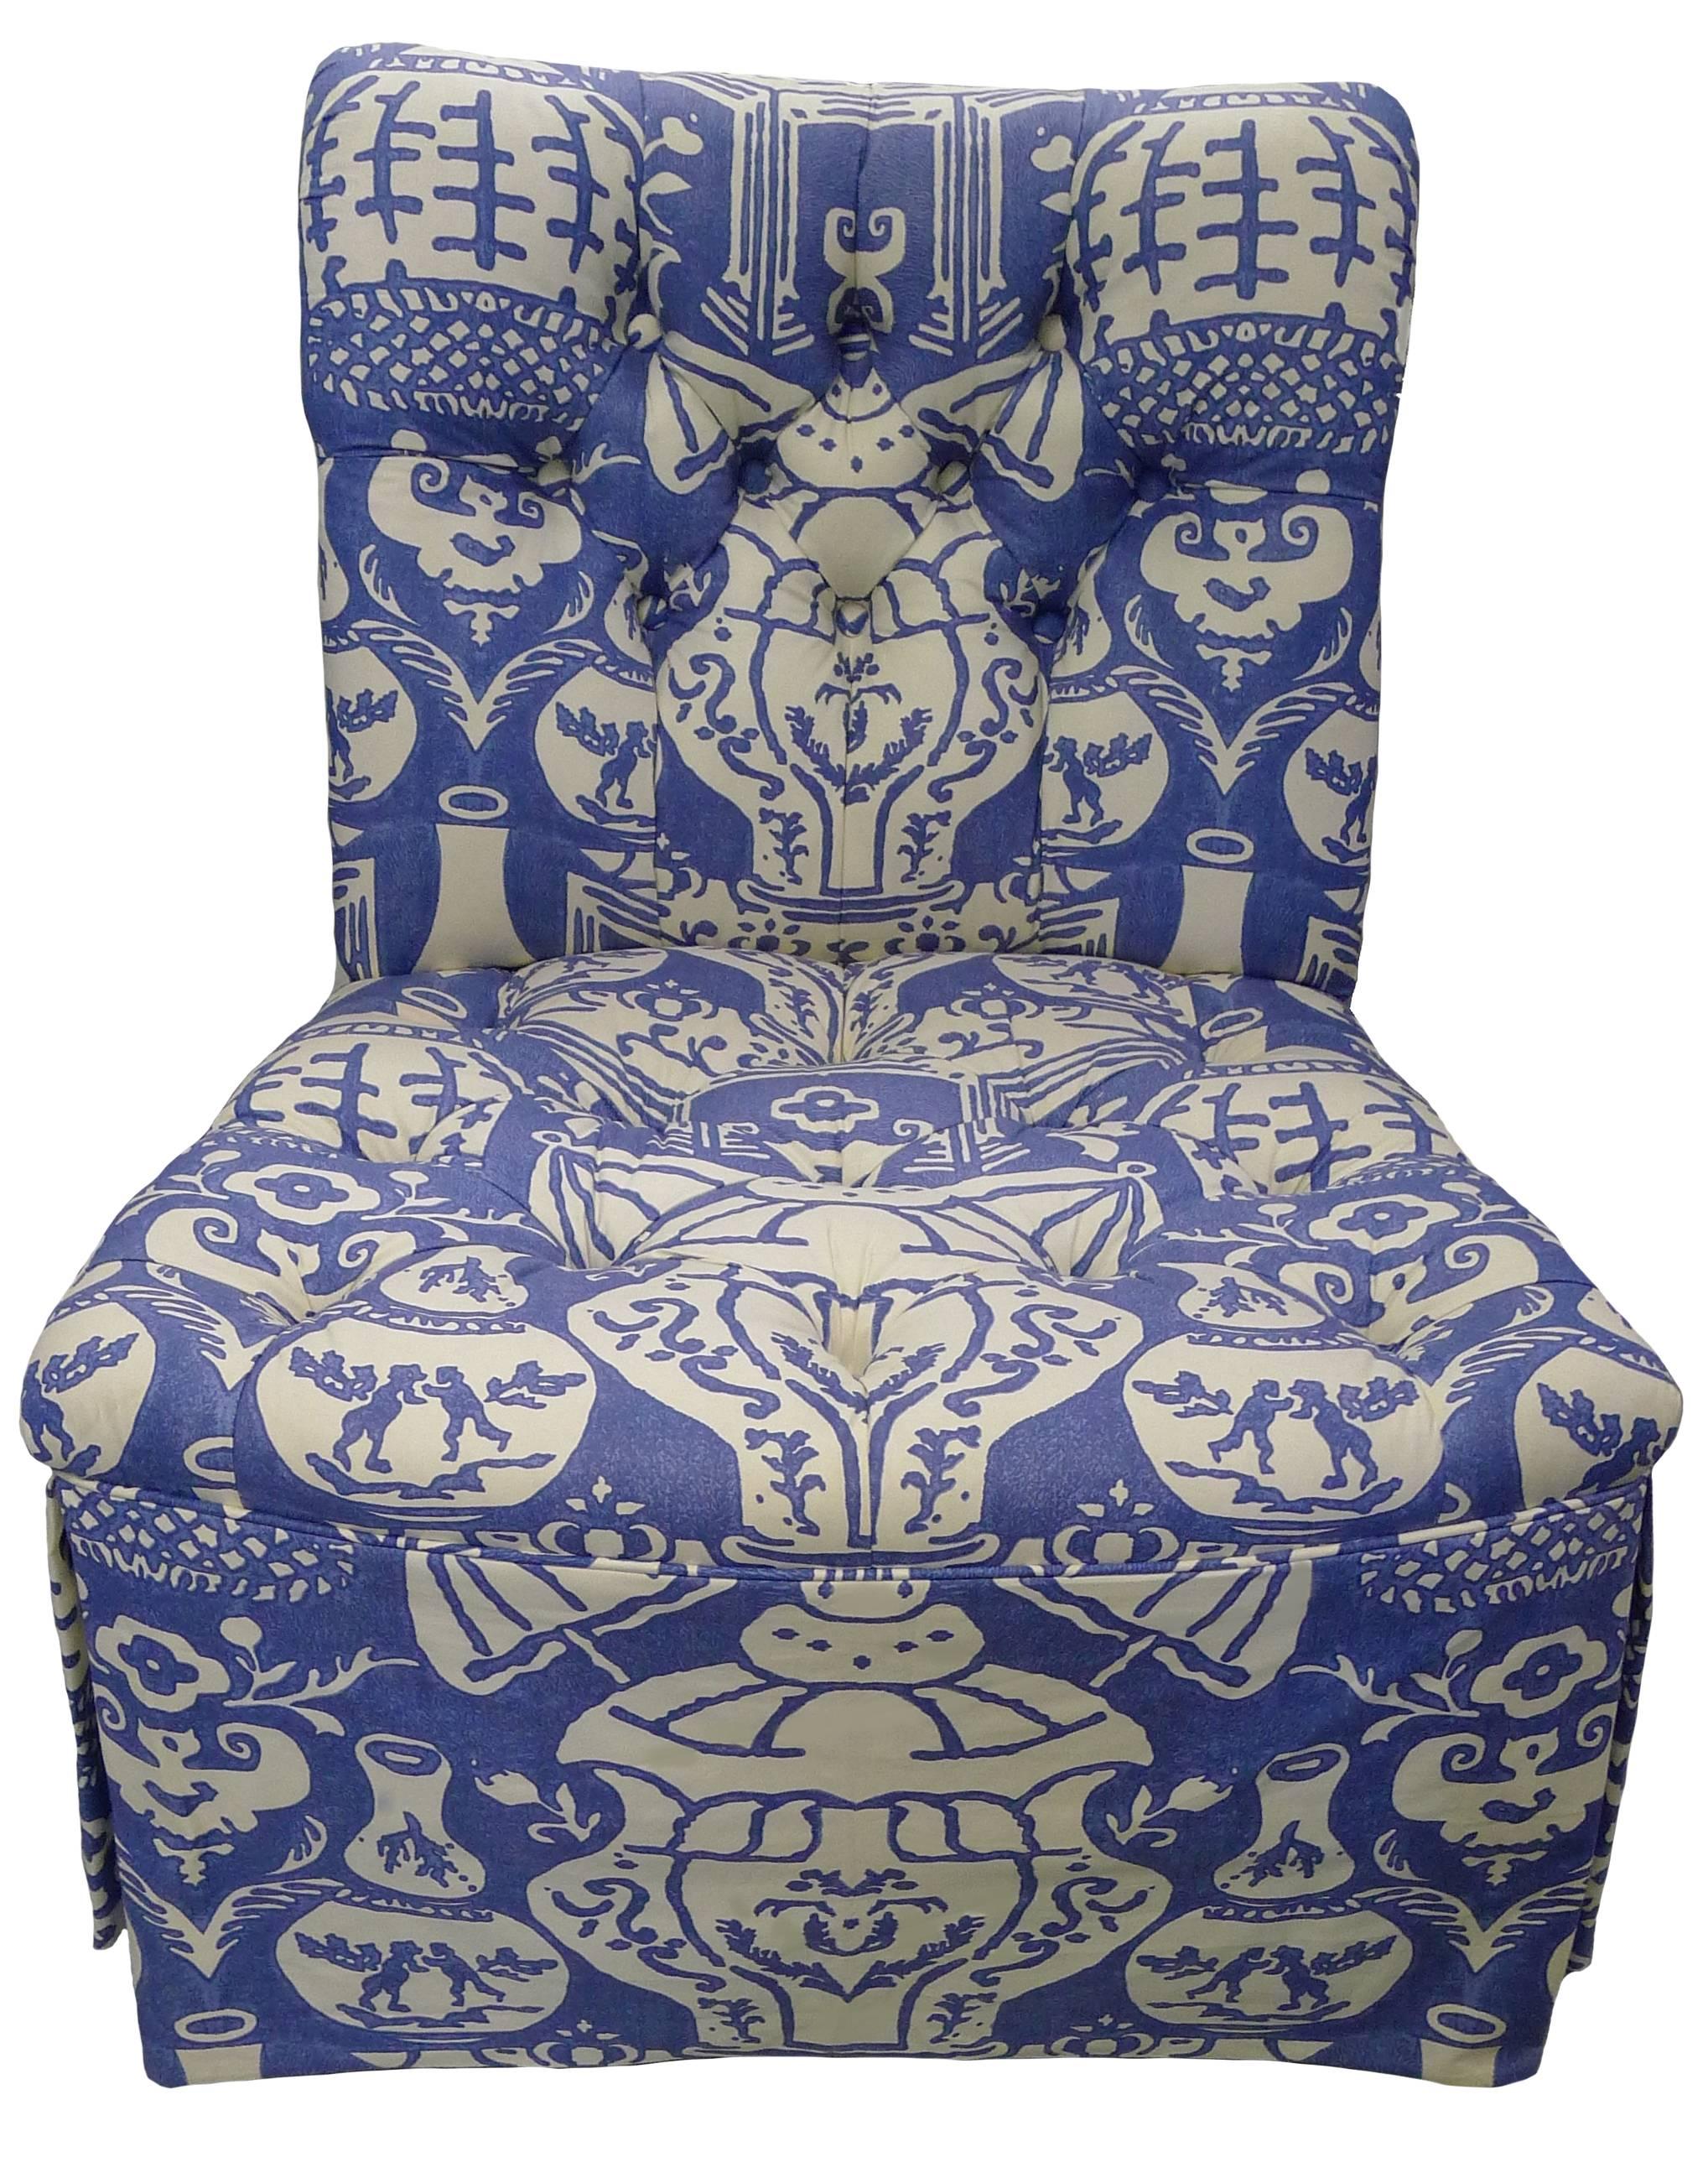 1940s slipper chair newly upholstered in vintage, 1970s, David Hicks The Vase print fabric in blue/ off-white. 
This striking, au courant fabric was purchased on the bolt and chosen especially for this glamorous well proportioned, 1940s slipper